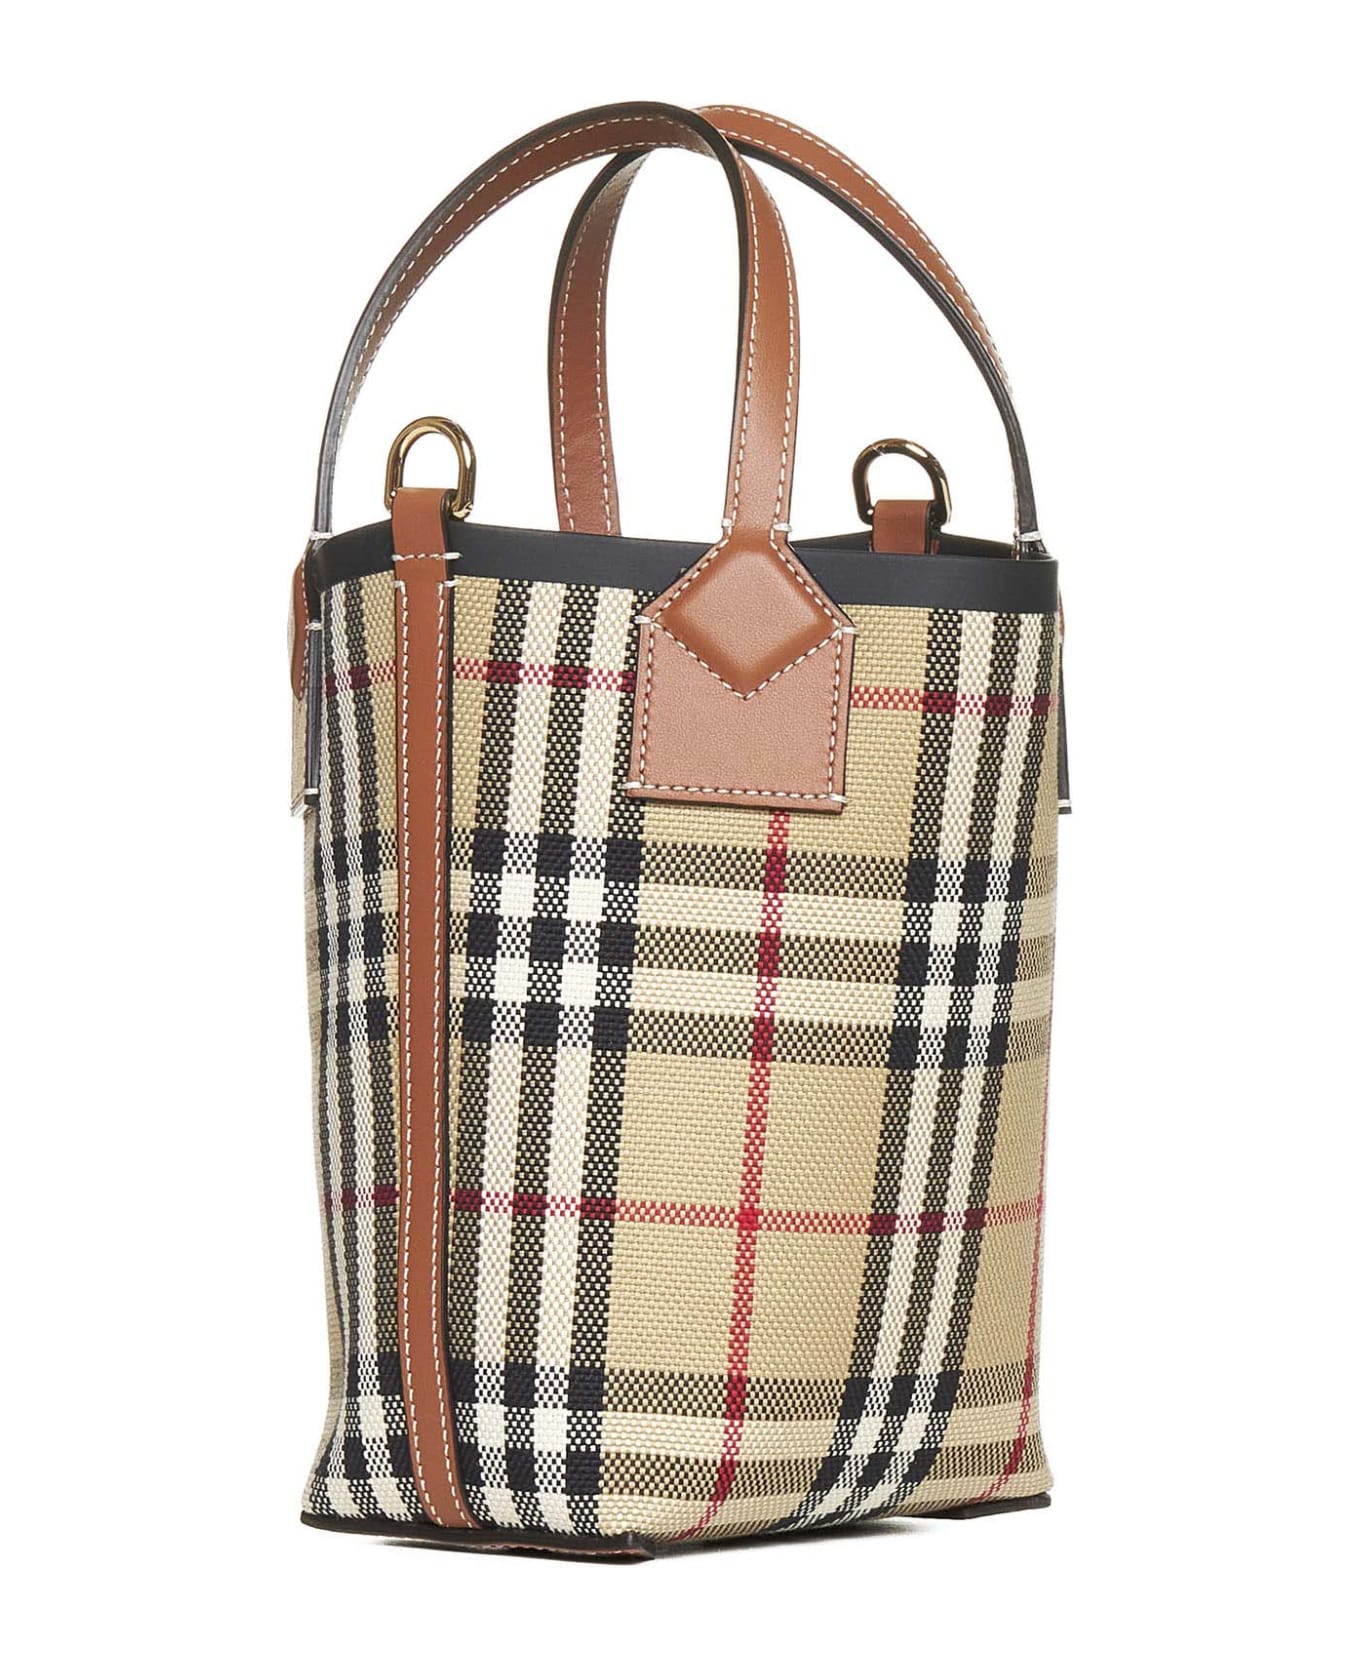 Burberry Tote - Vintage chck/a.beige